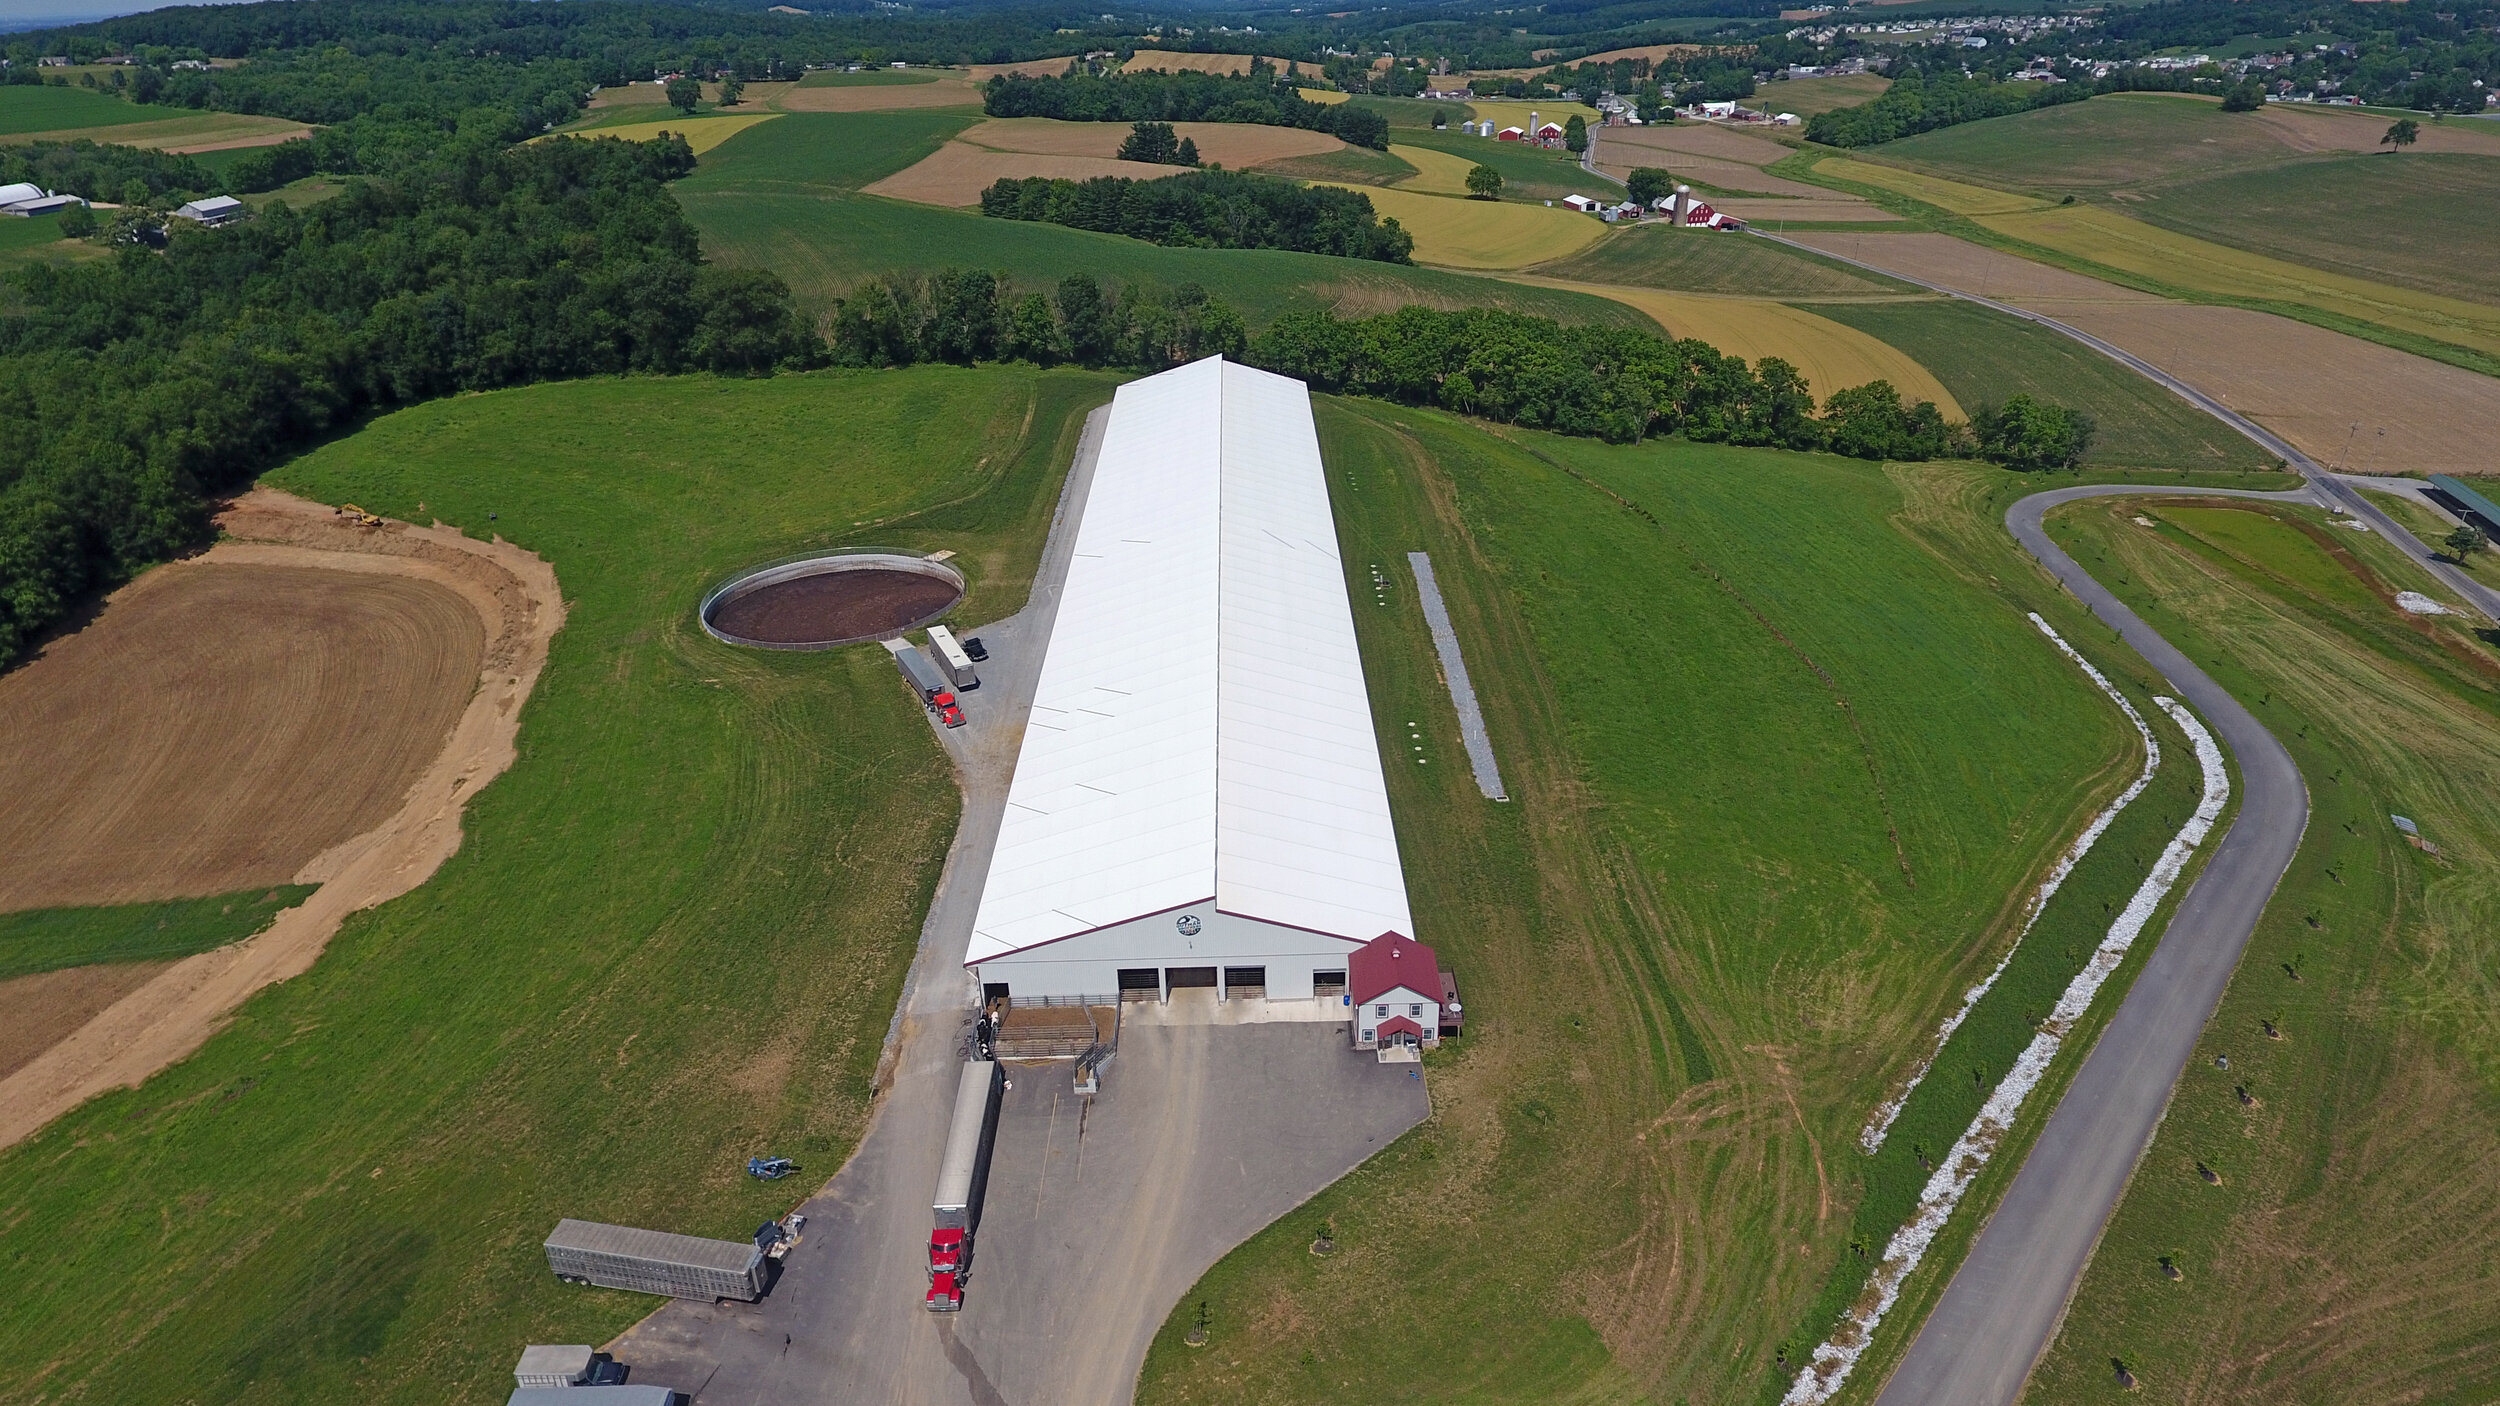 Top view of a dairy barn in Spring Grove, Pennsylvania.